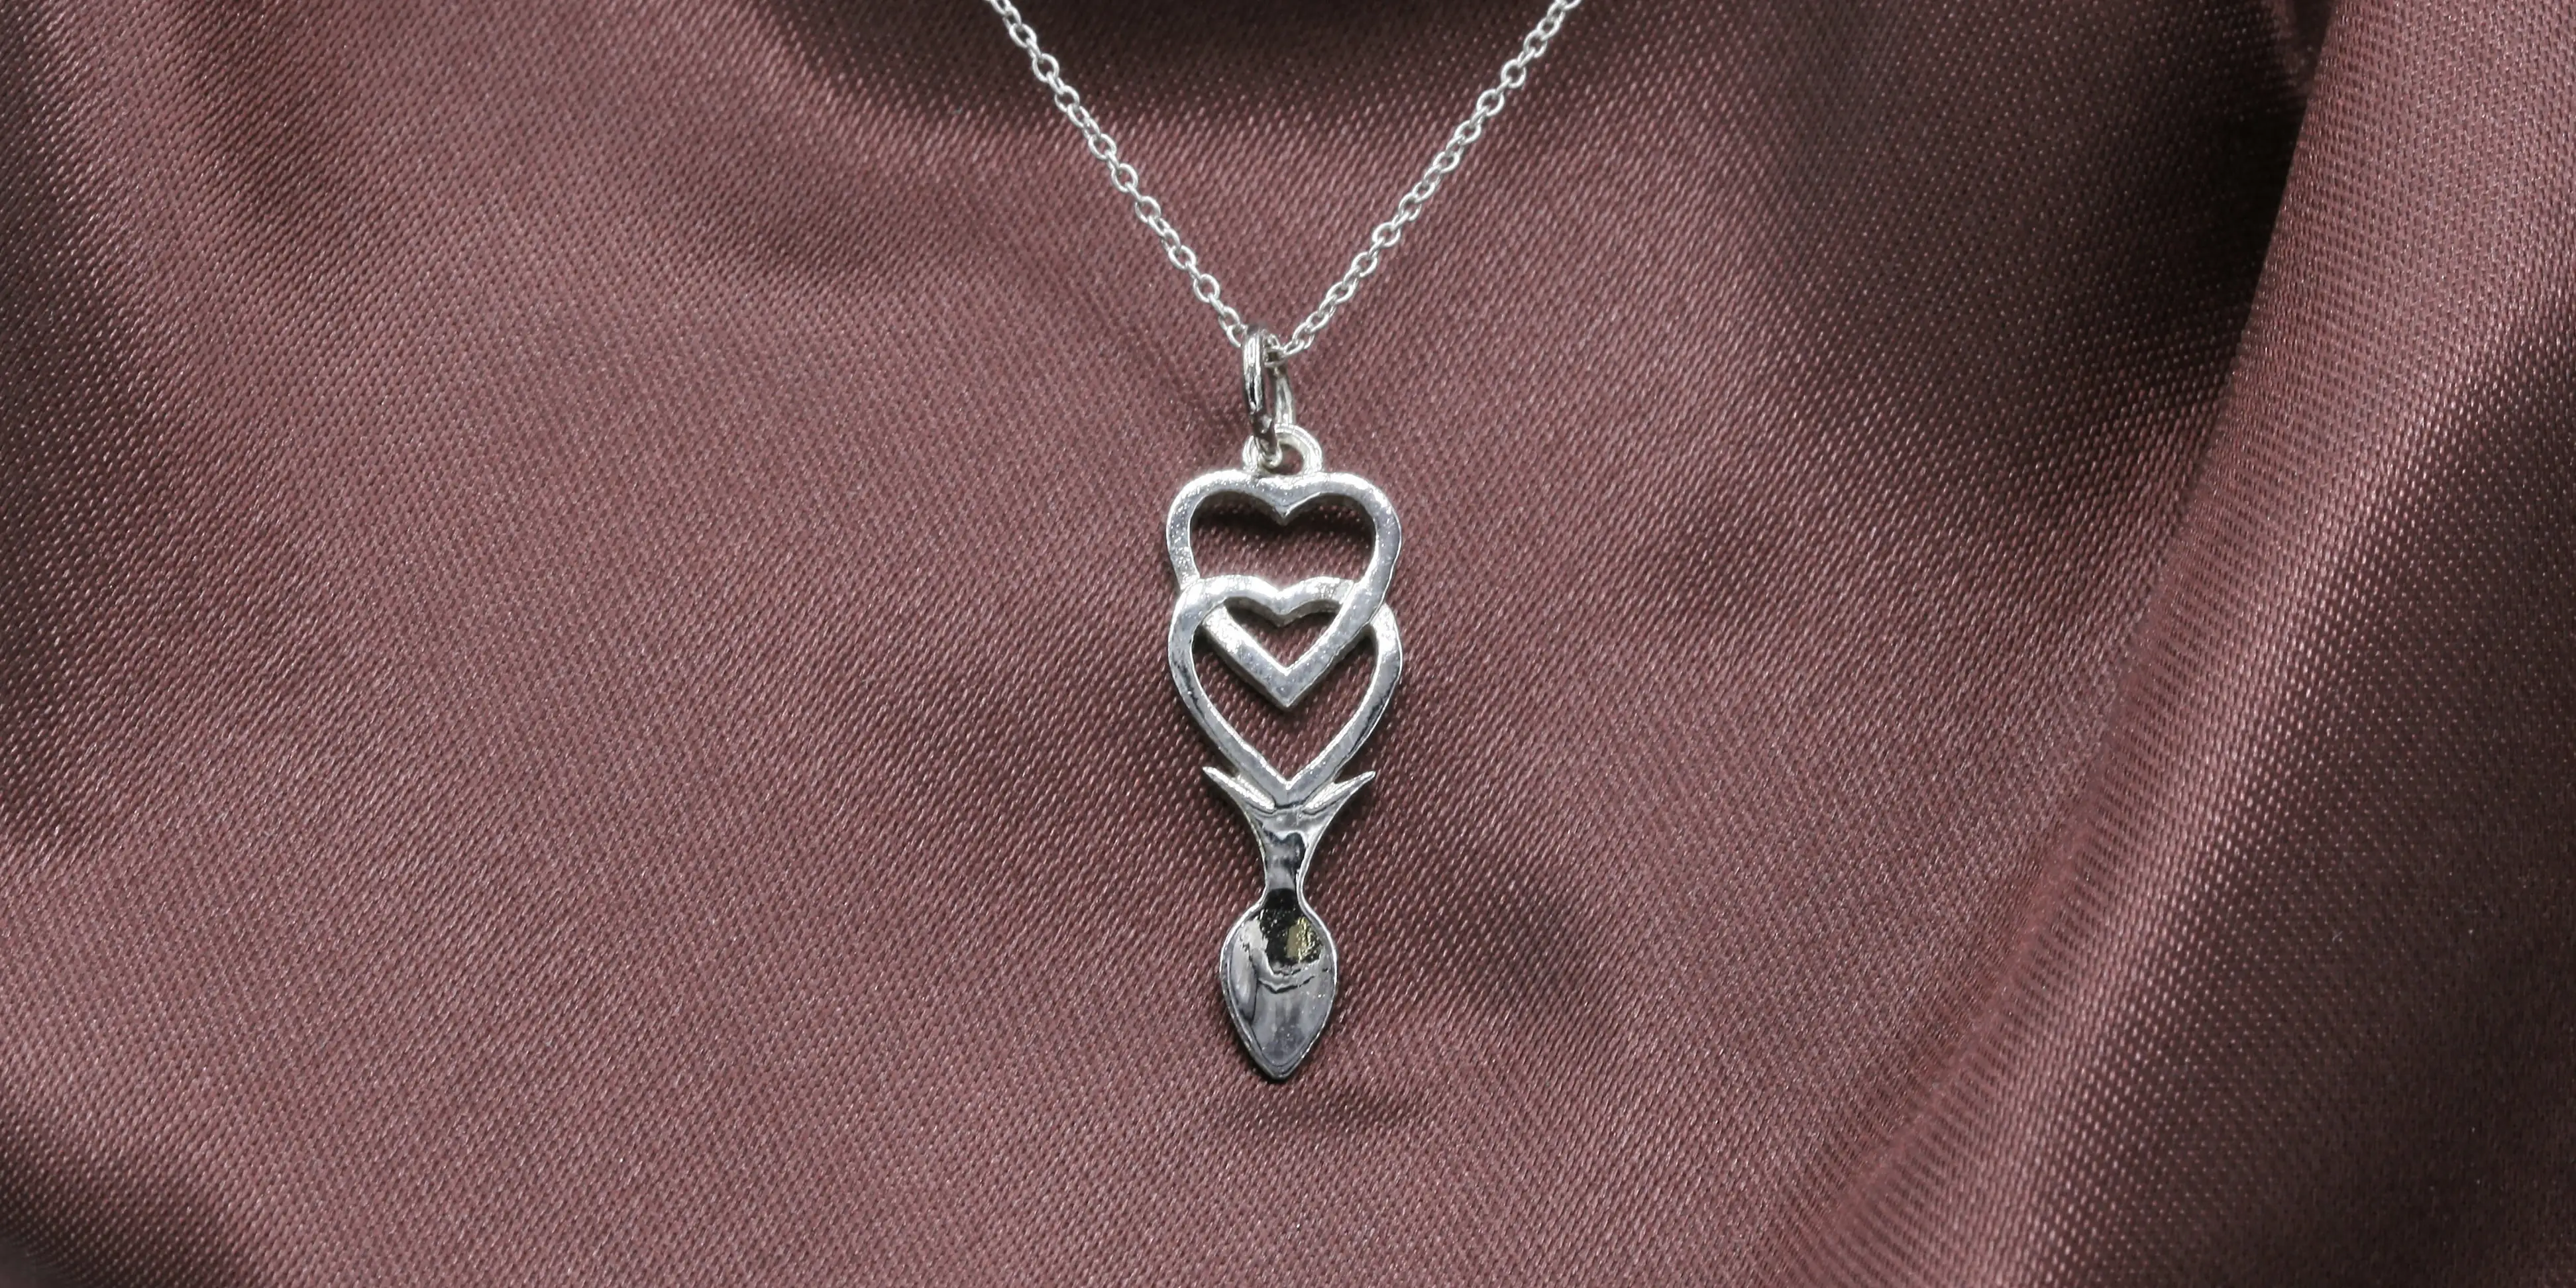 Main category image for Necklaces depicting a lovespoon necklace.